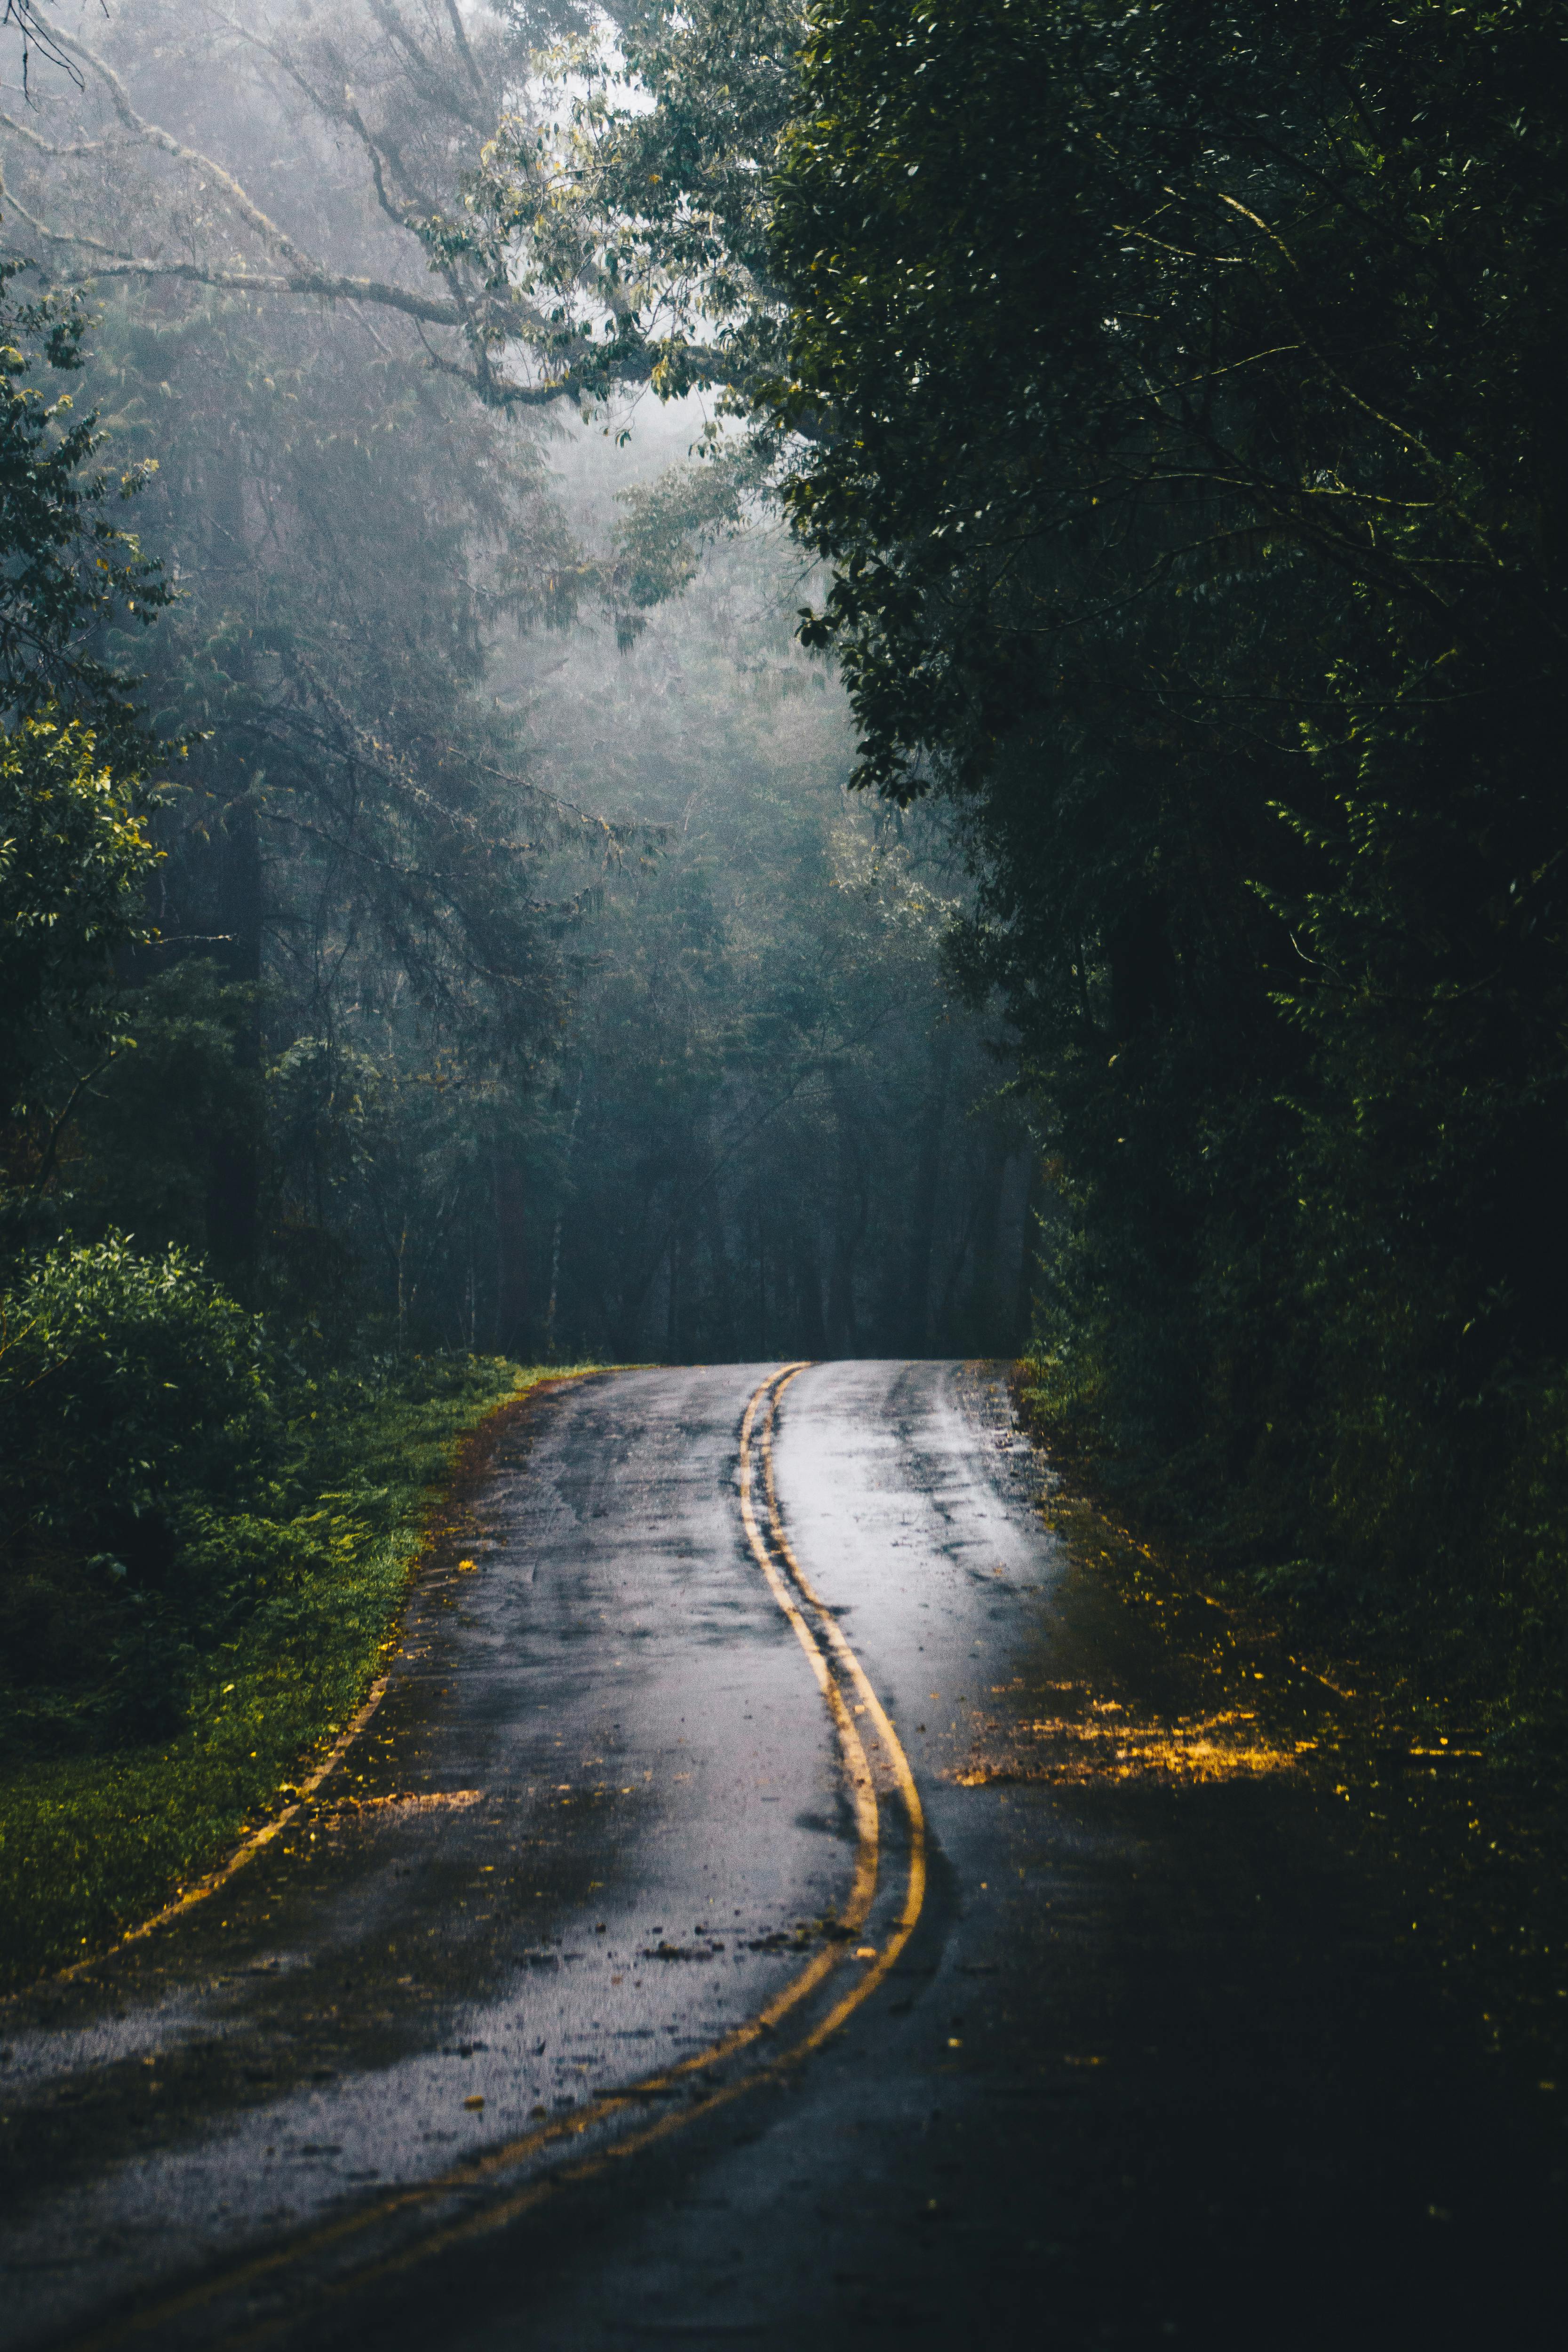 Road Images · Pexels · Free Stock Photos